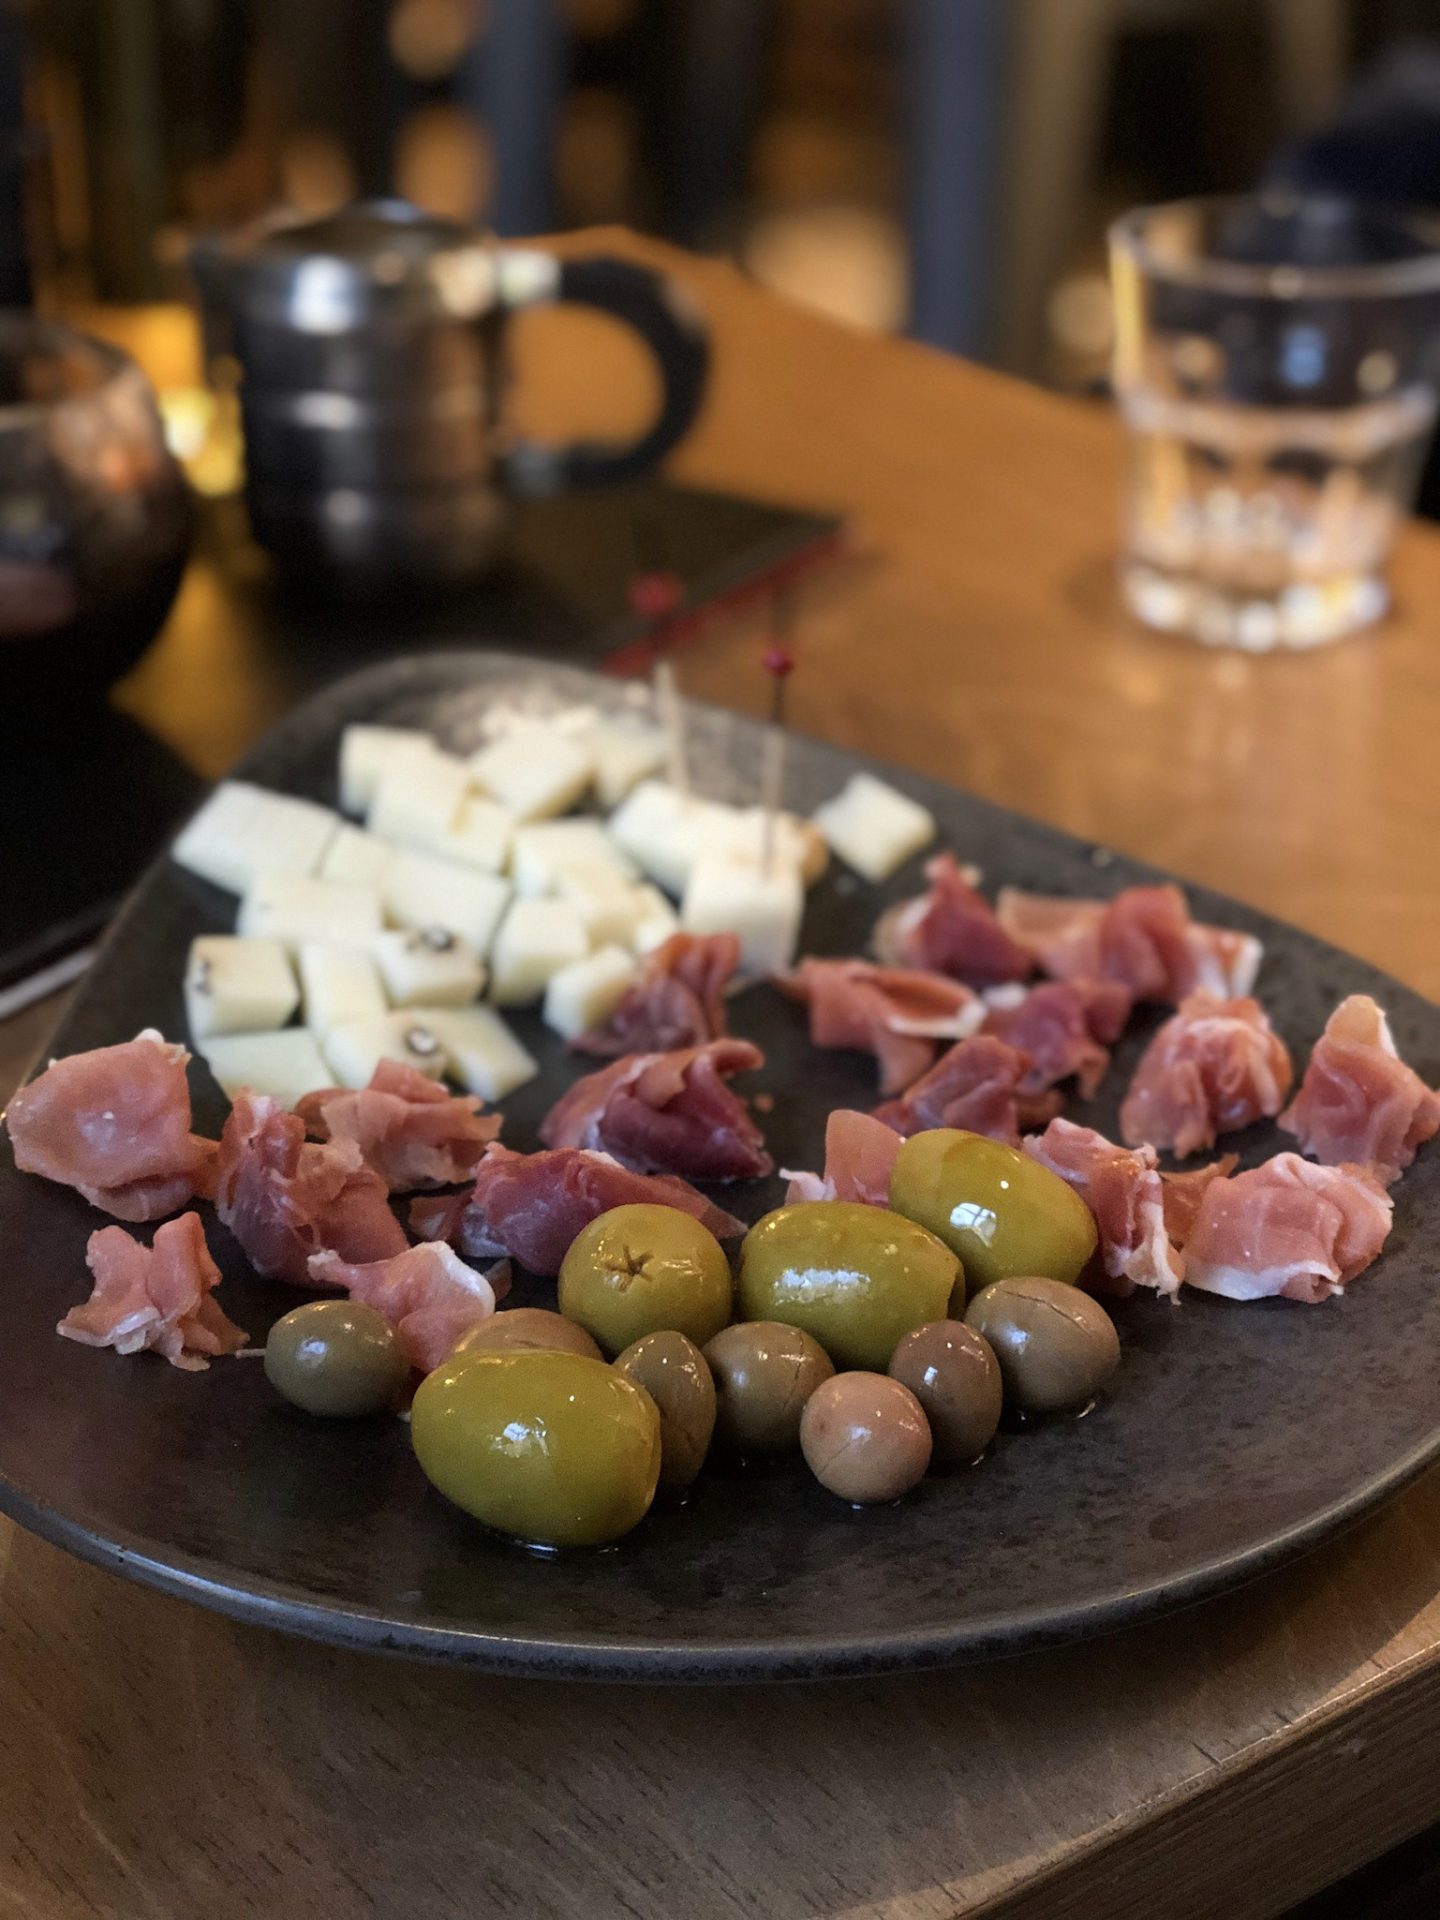 vilnius bars: a platter of cheese, ham and olives